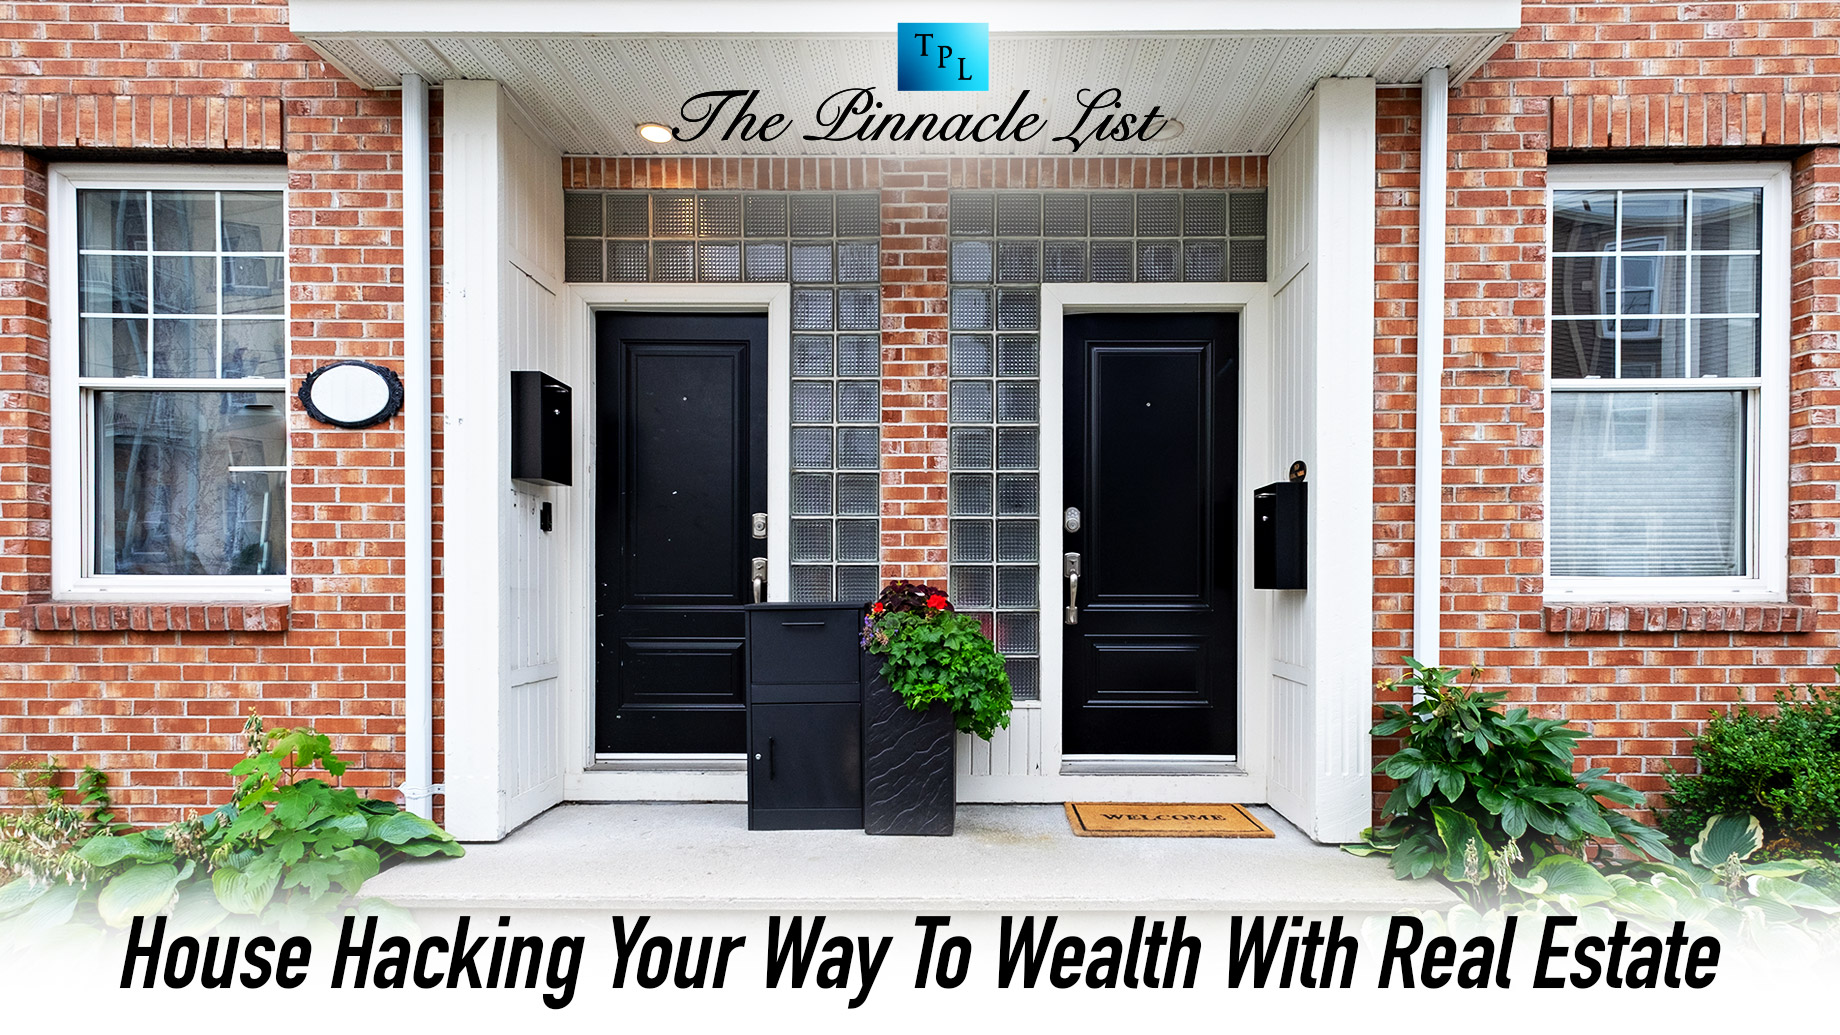 House Hacking Your Way To Wealth With Real Estate